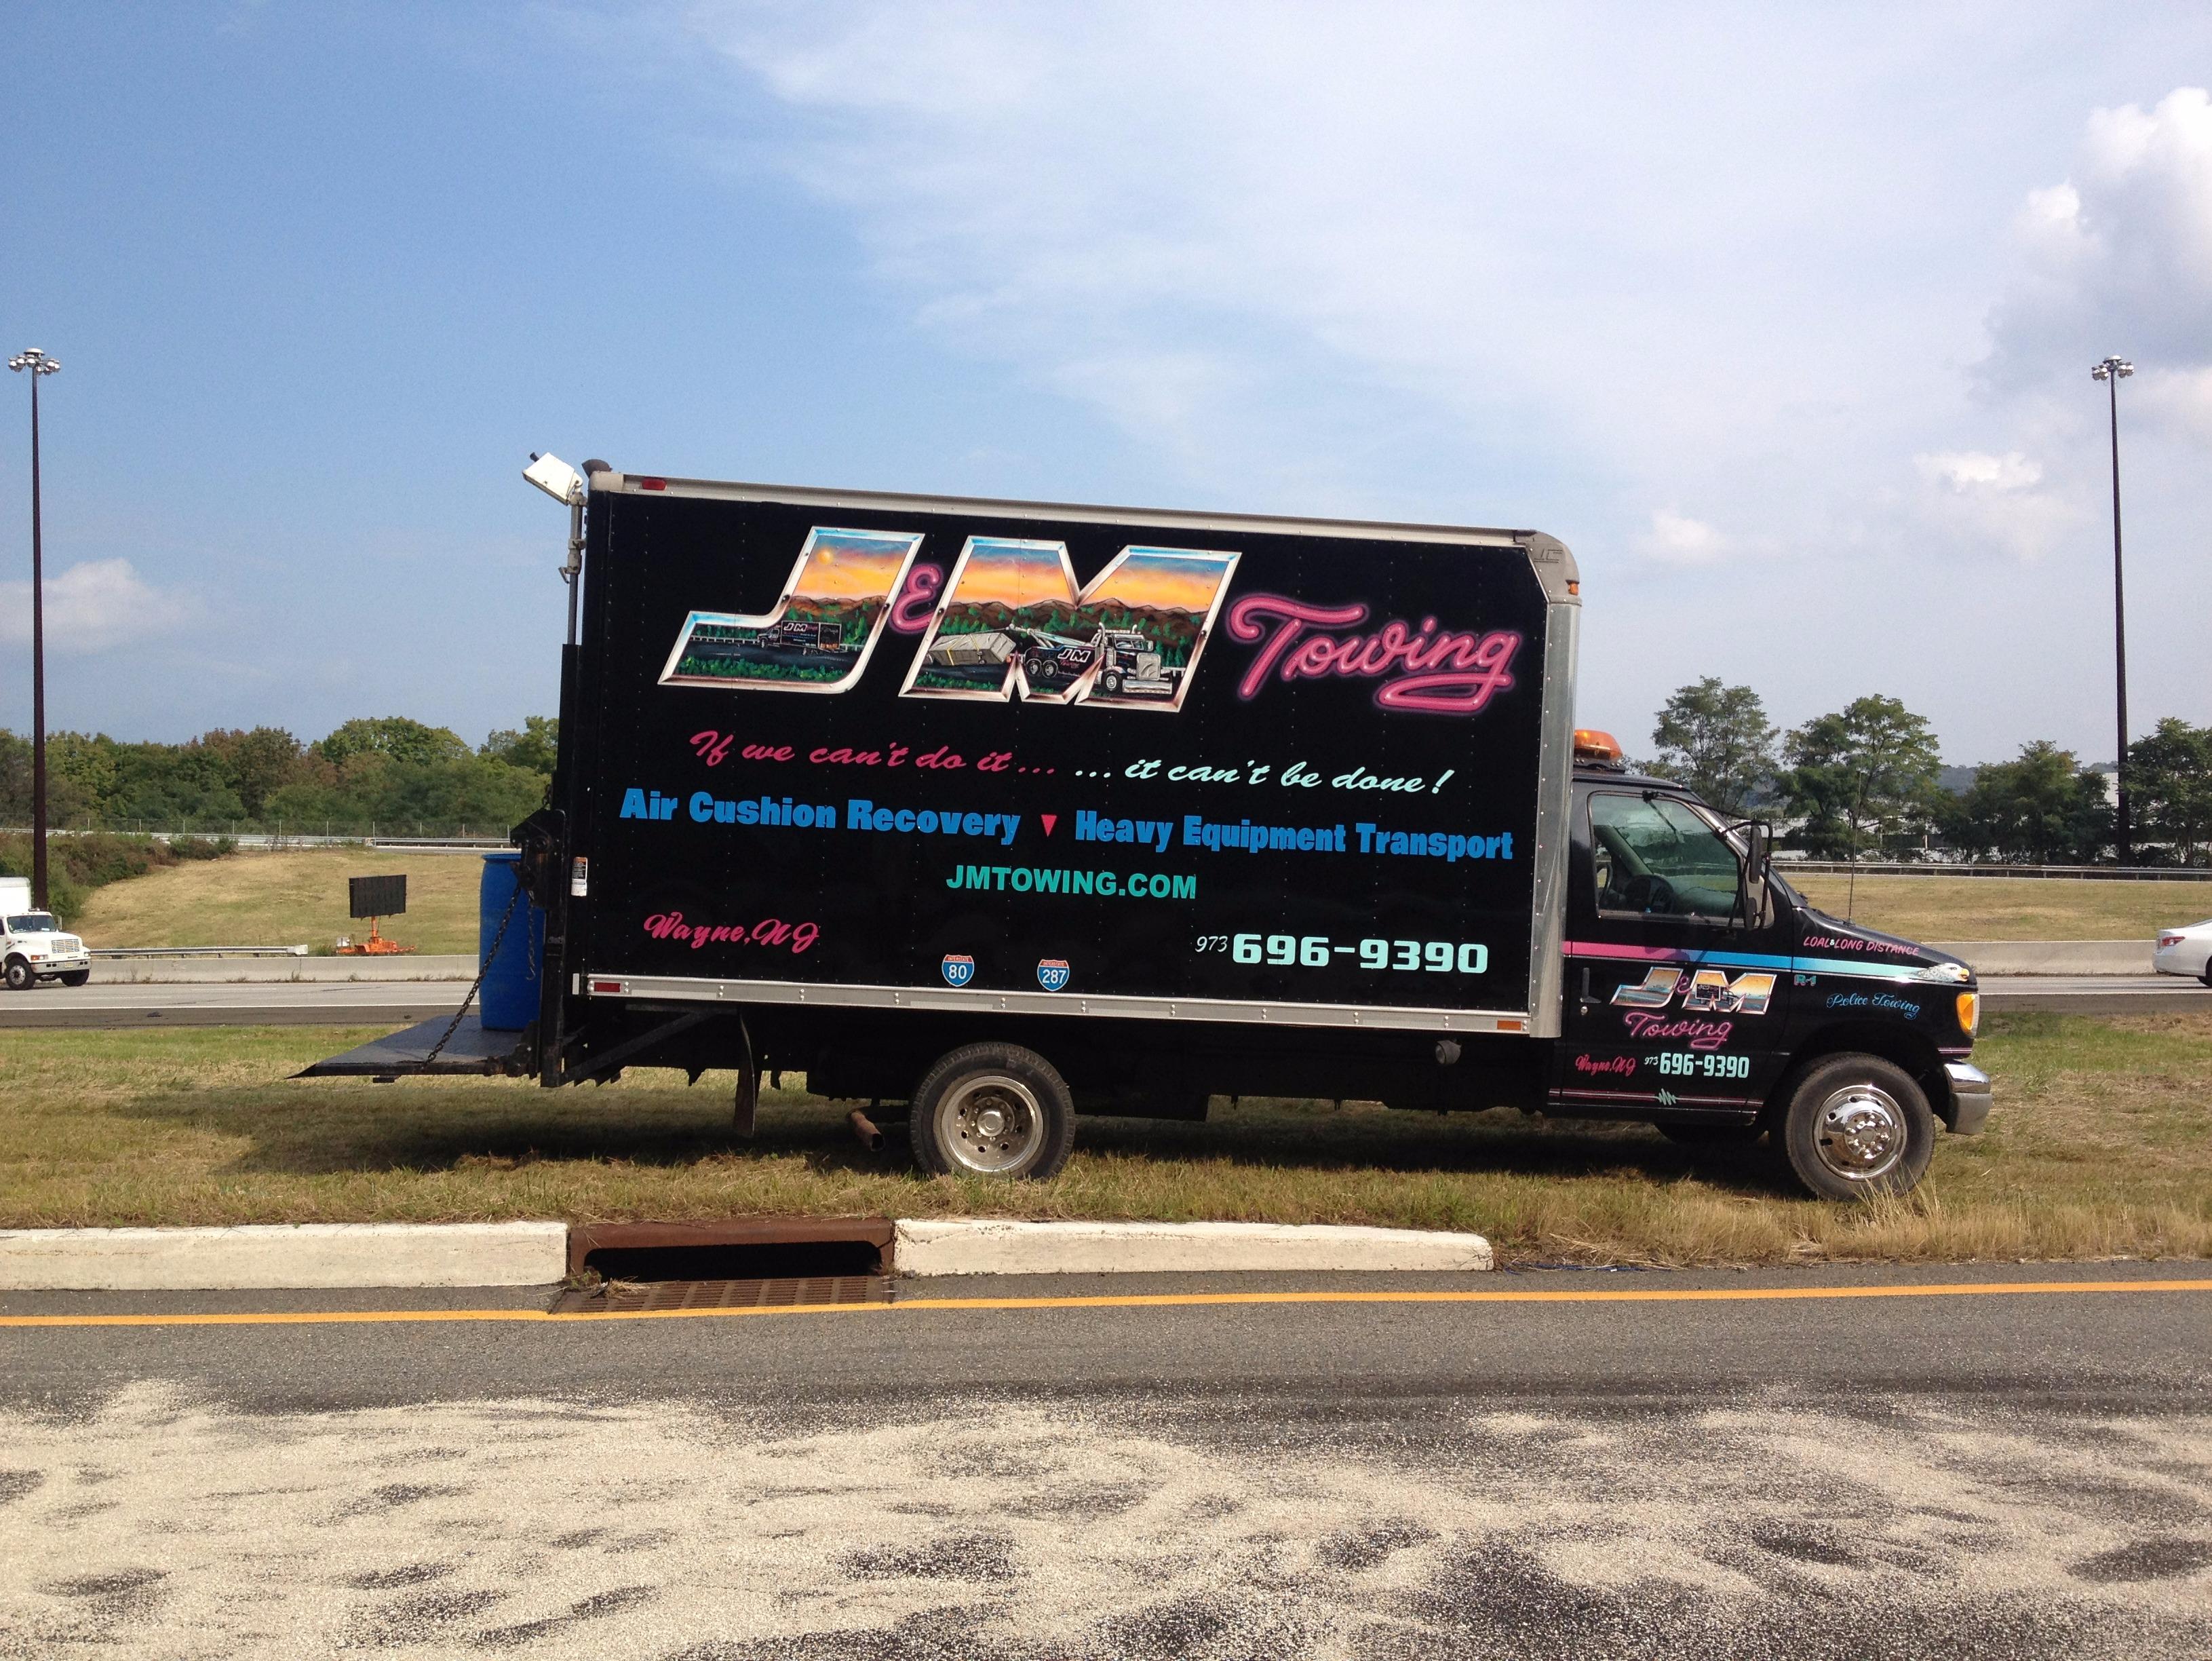 J & M Towing is a family owned business and we take pride in what we do. We are committed to providing the best service and competitive pricing on our towing & recovery services. We realize that if you’ve been involved in an accident or your vehicle has broken down, it’s already been a pretty bad day. That’s why when you contact J & M Towing, our guys will do everything possible to make your experience with us a great one.

J & M Towing was started by Joe Laborda back in 1976 with only one truck. Through hard work and a commitment to always put the customers’ needs first, word got around and the business began to grow. In order to provide an expanded array of services and accommodate the many needs of our customers, we opened a new facility in 2008. This secure facility is equipped with security cameras, lights, and fencing all around so we are able to provide safe, secure indoor and outdoor storage of our customers’ vehicles. We also work with several area police departments who use our facility to store stolen cars and other vehicles because they know that valuable evidence won’t be tampered with!
24
Over the years we have received awards from Tow Times Magazine, American Towman Exposition, The Maine Tow Show, and Statewide Towing Association Trade Show. J & M Towing has also won Best of Show in New Hampshire and are proud to be featured in “The Greatest Towing Companies in the World!”

Towing
J & M Towing is an experienced, full service towing & recovery company offering a wide range of services. Our fleet consists of wreckers, flatbeds, landolls, and a 40-ton Peterbilt rotator crane so there is literally no project that we can’t handle. See us for the absolute best in:
Light Duty Towing | Medium Duty Towing | Heavy Duty Towing | Long Distance Towing | Flatbed Towing | Heavy Equipment Hauling | Motorcycle Towing | Motor Home Towing | Winching | Impounding |  Multi-Vehicle Transport | Hazmat Cleanup | Repossessions | 
Load Transfer Service | Load Shift Service | Underwater Recovery | Jump Starts | Lock Out Service | Fuel Delivery | Tire Changes | Custom Hydraulic Hoses | Lowboy Service | Landoll Service | Roll Off Container Service | Air Cushion Recovery | Rotator Crane Service | Forklift Service | Used Car Sales | Indoor & Outdoor Storage

Heavy Transport
Heavy equipment hauling is something many towing companies provide, but few can do it as well as J & M Towing. You see, heavy equipment hauling is not something we do as a sideline, it’s a specialty of ours and we have the right equipment and the right people to get the job done.
Our fleet includes flat beds, lowboys, and specialty equipment so we are able to handle full loads, L-T-L, oversized loads, and more. Construction equipment, trailers, forklifts, vehicles, generators, steel beams…bring’em on! Whatever you have to get from point A to point B, J & M Towing will make sure it arrives safely and on time!
All freight is covered to full value by our insurance and we will be happy to handle all of the routing and transportation permits as well.

Heavy Recovery

While J & M Towing is available 24/7 for all kinds of light, medium, and heavy duty towing, it is our heavy-duty recovery services which really separate us from the competition. At the heart of a fleet is a 40-ton Peterbilt rotator crane with 5 winches and the ability to lift a truck and spin it 360 degrees. It is fully equipped with special recovery equipment so whether your dump truck has run off the road or you need to lift a generator or A/C unit onto a roof, we can get it done. We have 3 forklifts for use when necessary and while we have a moment, we want to tell you about our people. They’re simply the best in the business. All of our heavy-duty operators are either Wreckmaster or TRAA certified. They are prompt, courteous, experienced, and thoroughly professional. Many of them have been with us for a long time so they not only know their job, they know what is expected of them.

When J & M Towing is on the job, you can take confidence in the fact that one of the best in the business is behind you all the way. Thank you for your business and for placing your trust in us, we won’t let you down.
Remember: "If we can't do it, it cant be done!"
Call or Click jmtowing.com Today! 973-696-9390